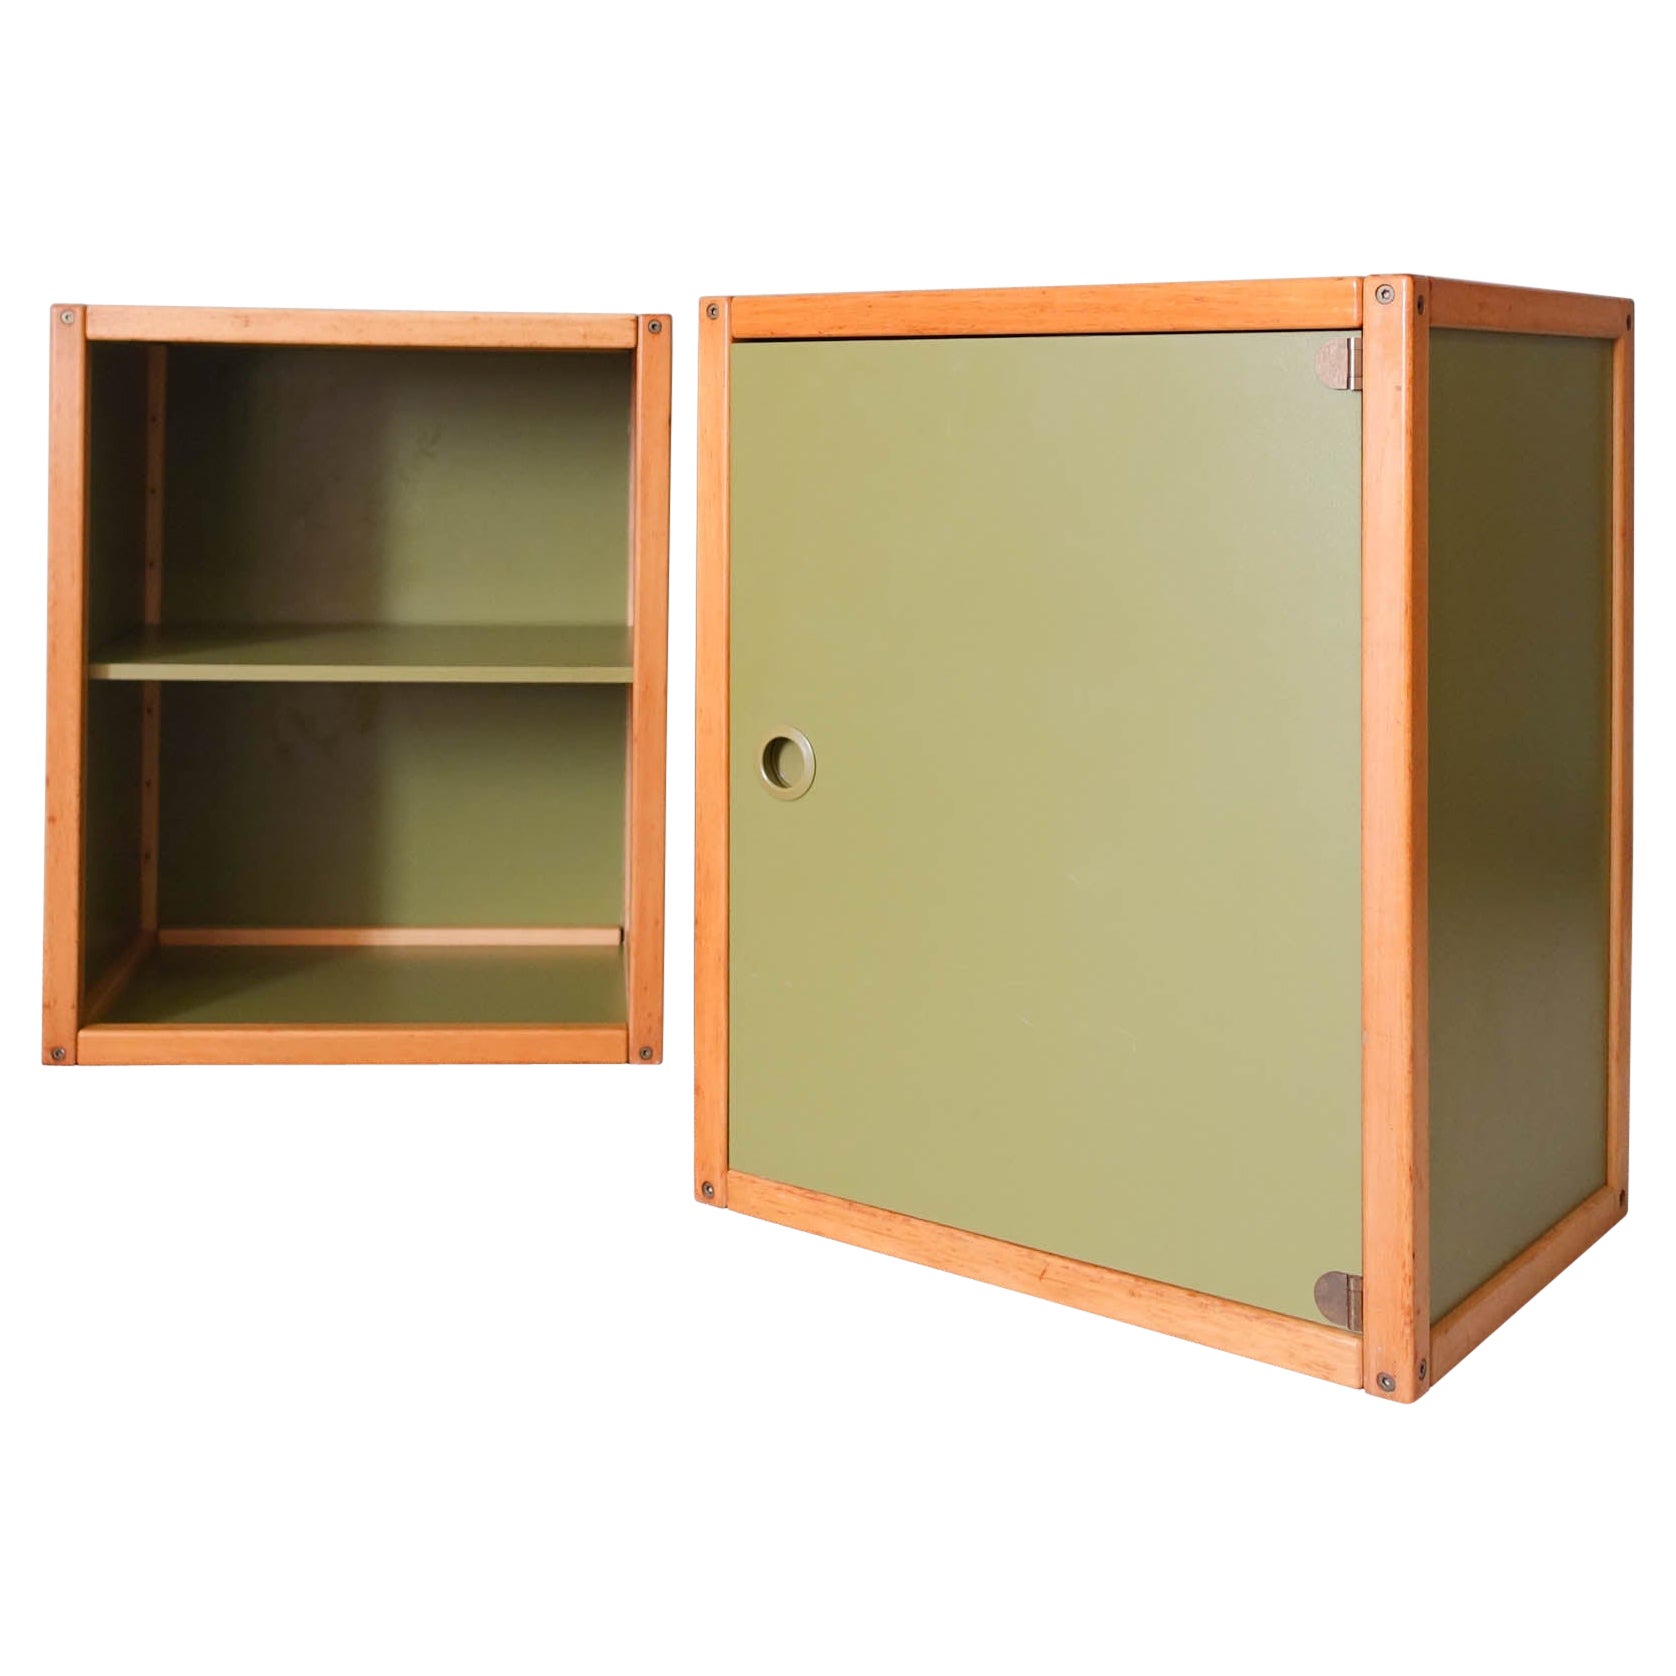 Pair of Vintage Profilsystem Collection Storage Units by Elmar Flötotto For Sale